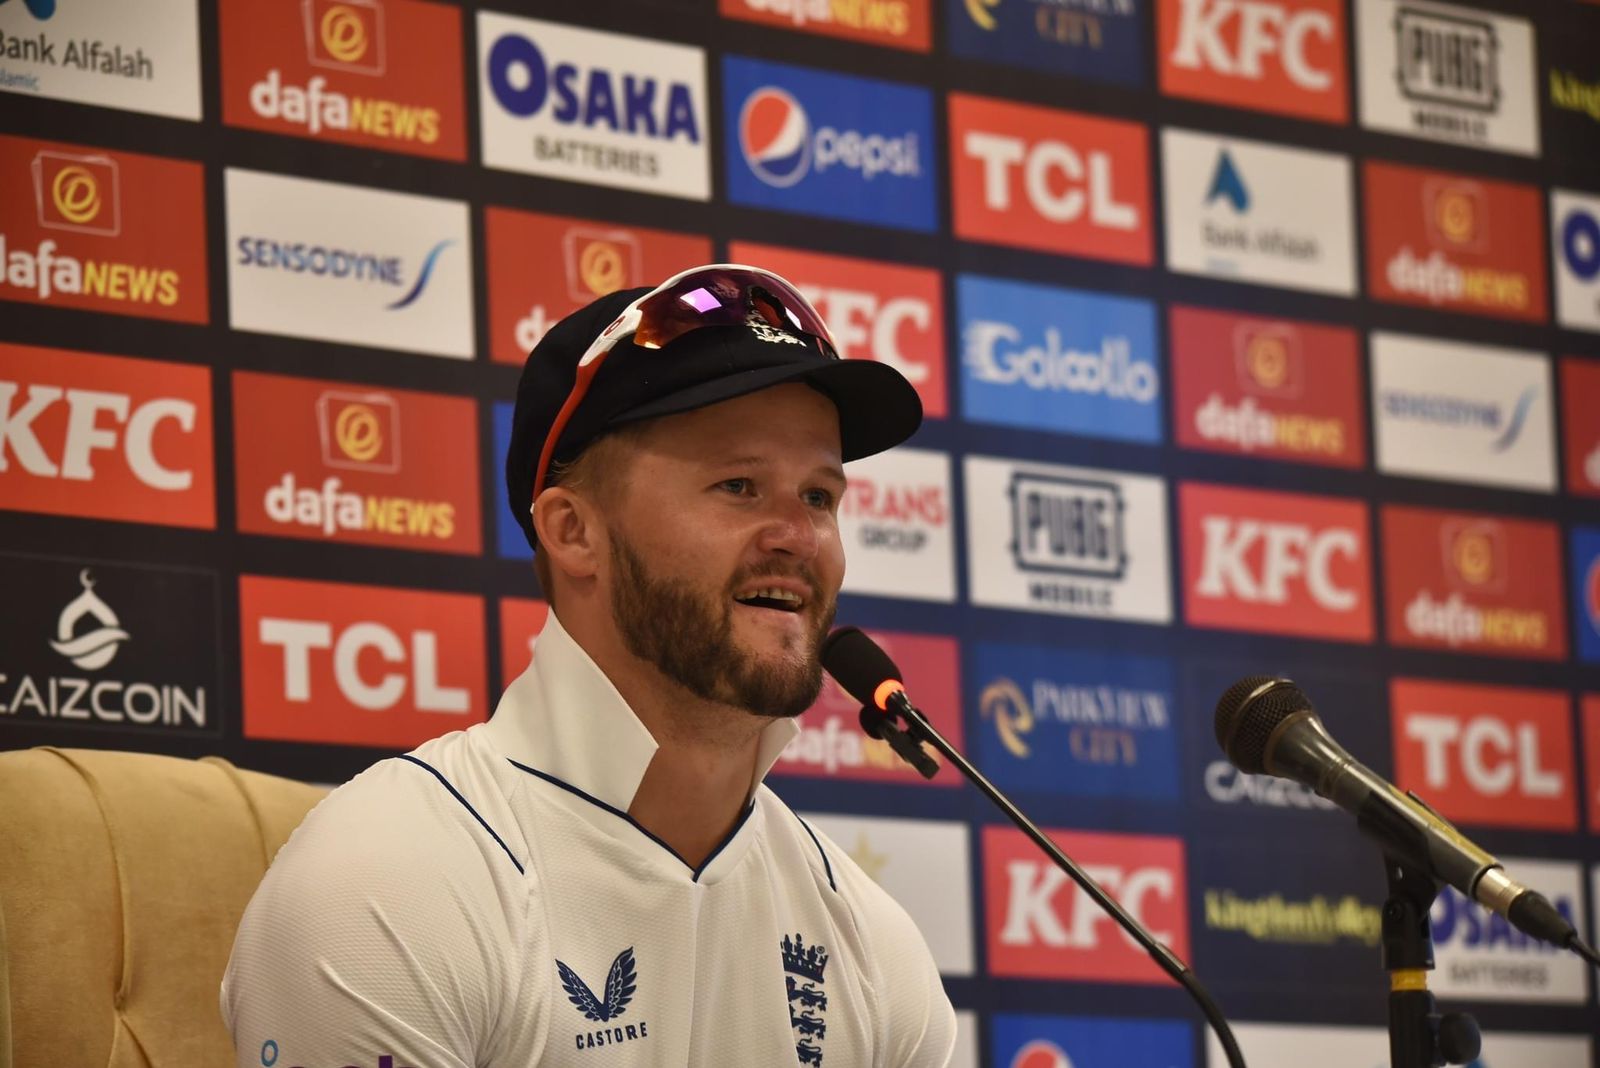 Ben Duckett held a press conference at the end of the first day.